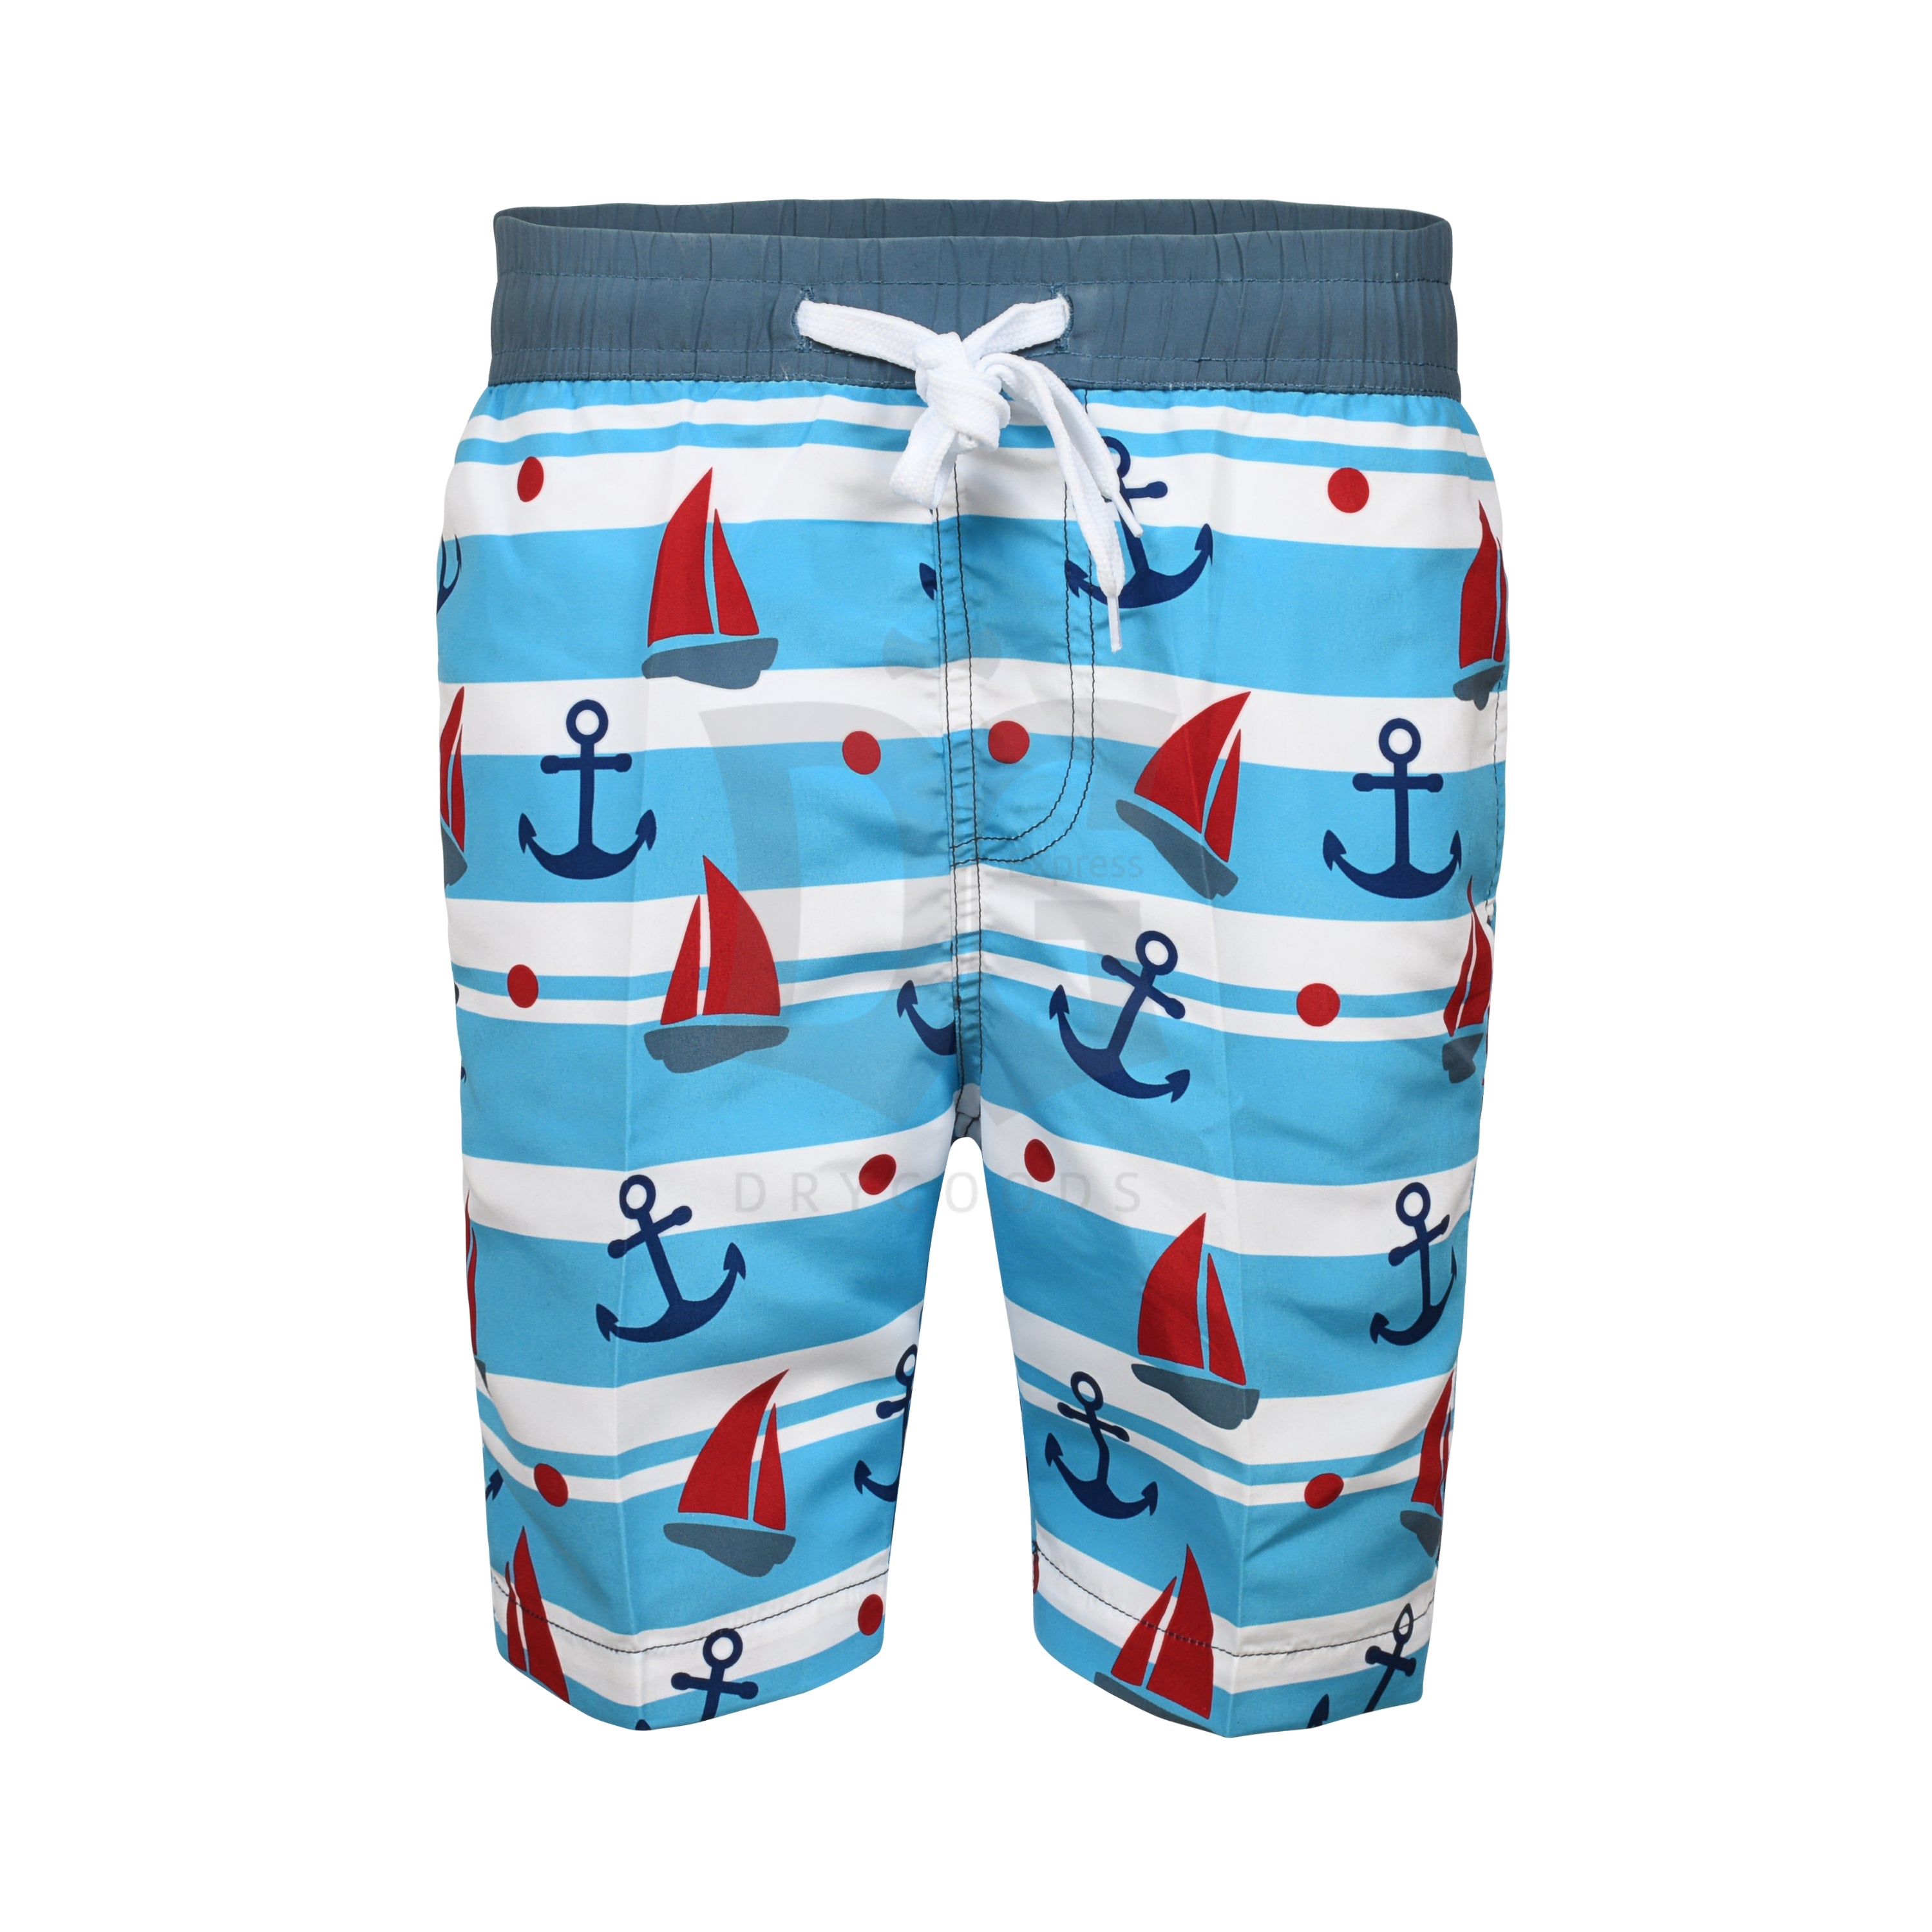 Abstract Boy's Sailboat Bathing Suit